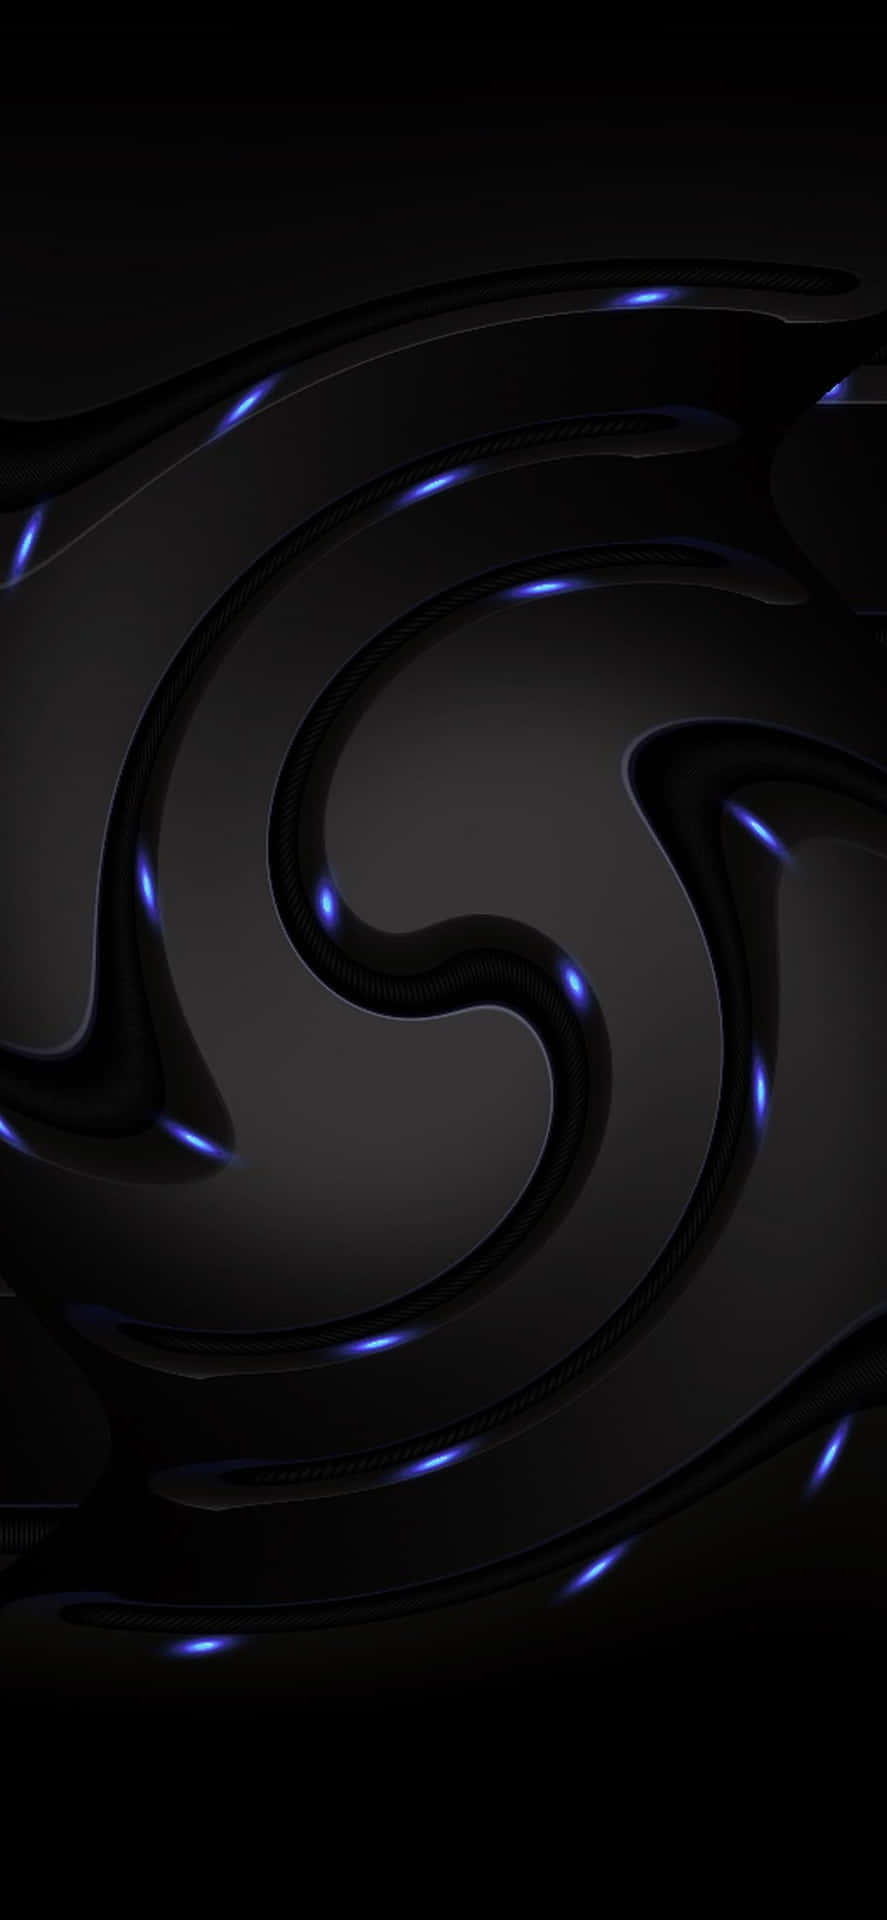 Blue And Black Swirls On A Black Background Wallpaper